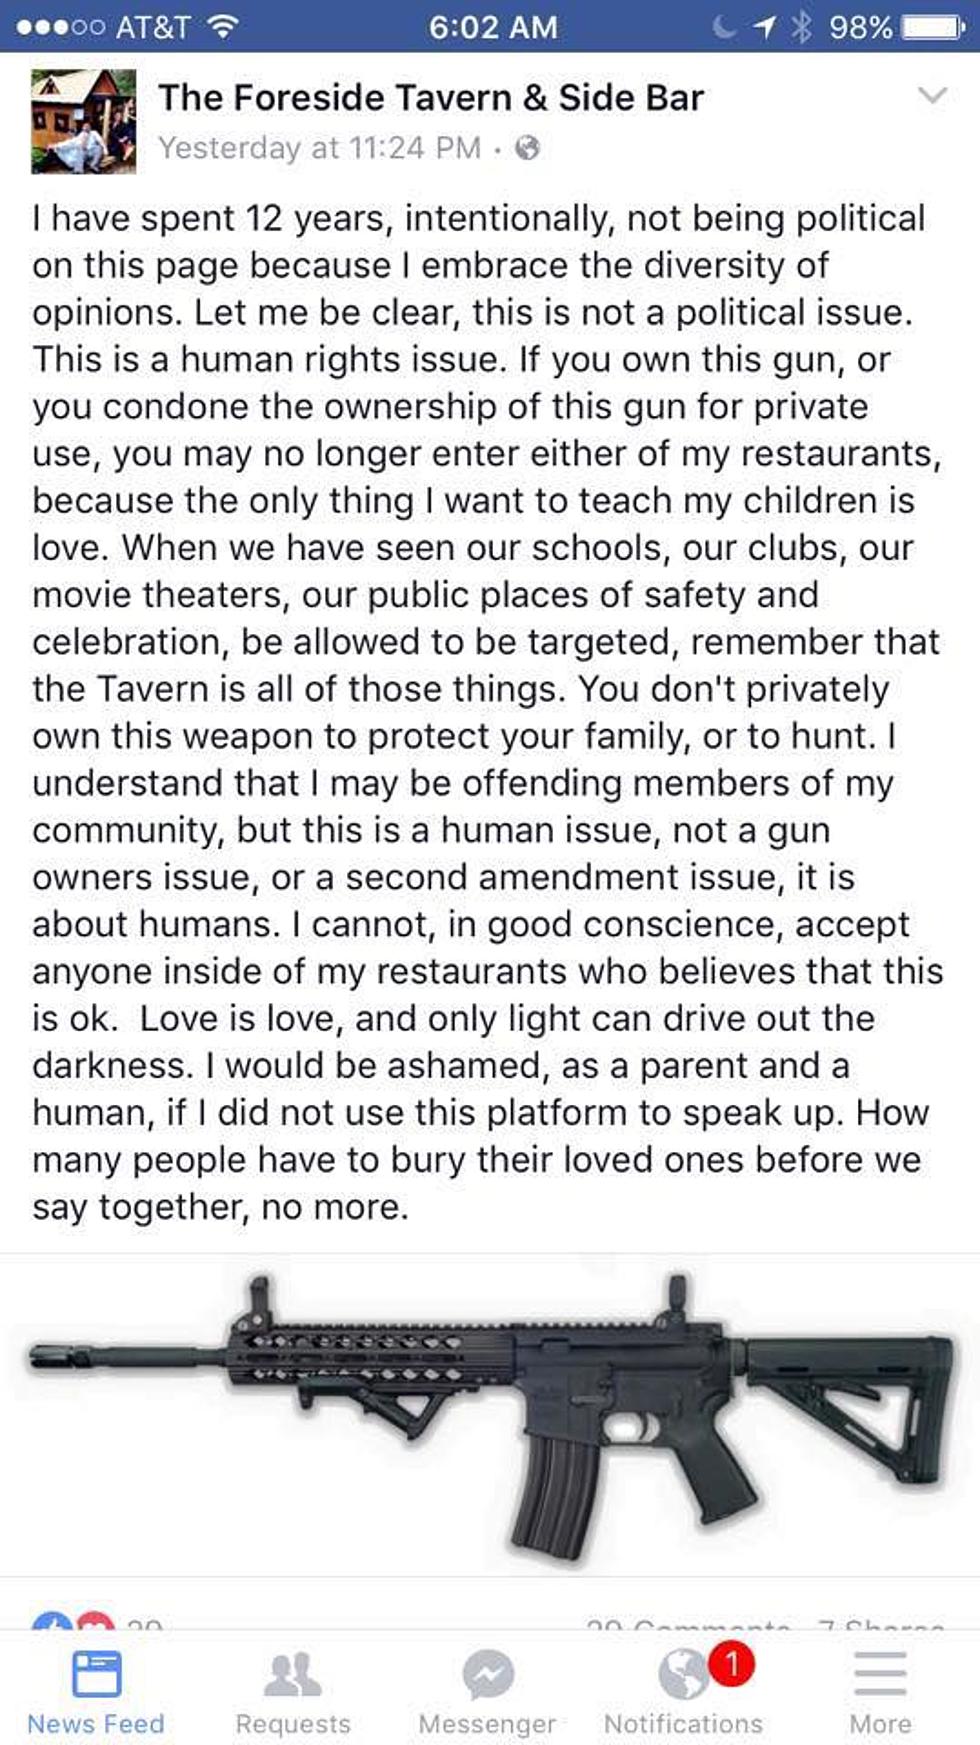 Owner Of &#8216;Grace&#8217; Portland And &#8216;Foreside Tavern&#8217; Falmouth Is Banning Customers Who Condone Or Own Certain Guns